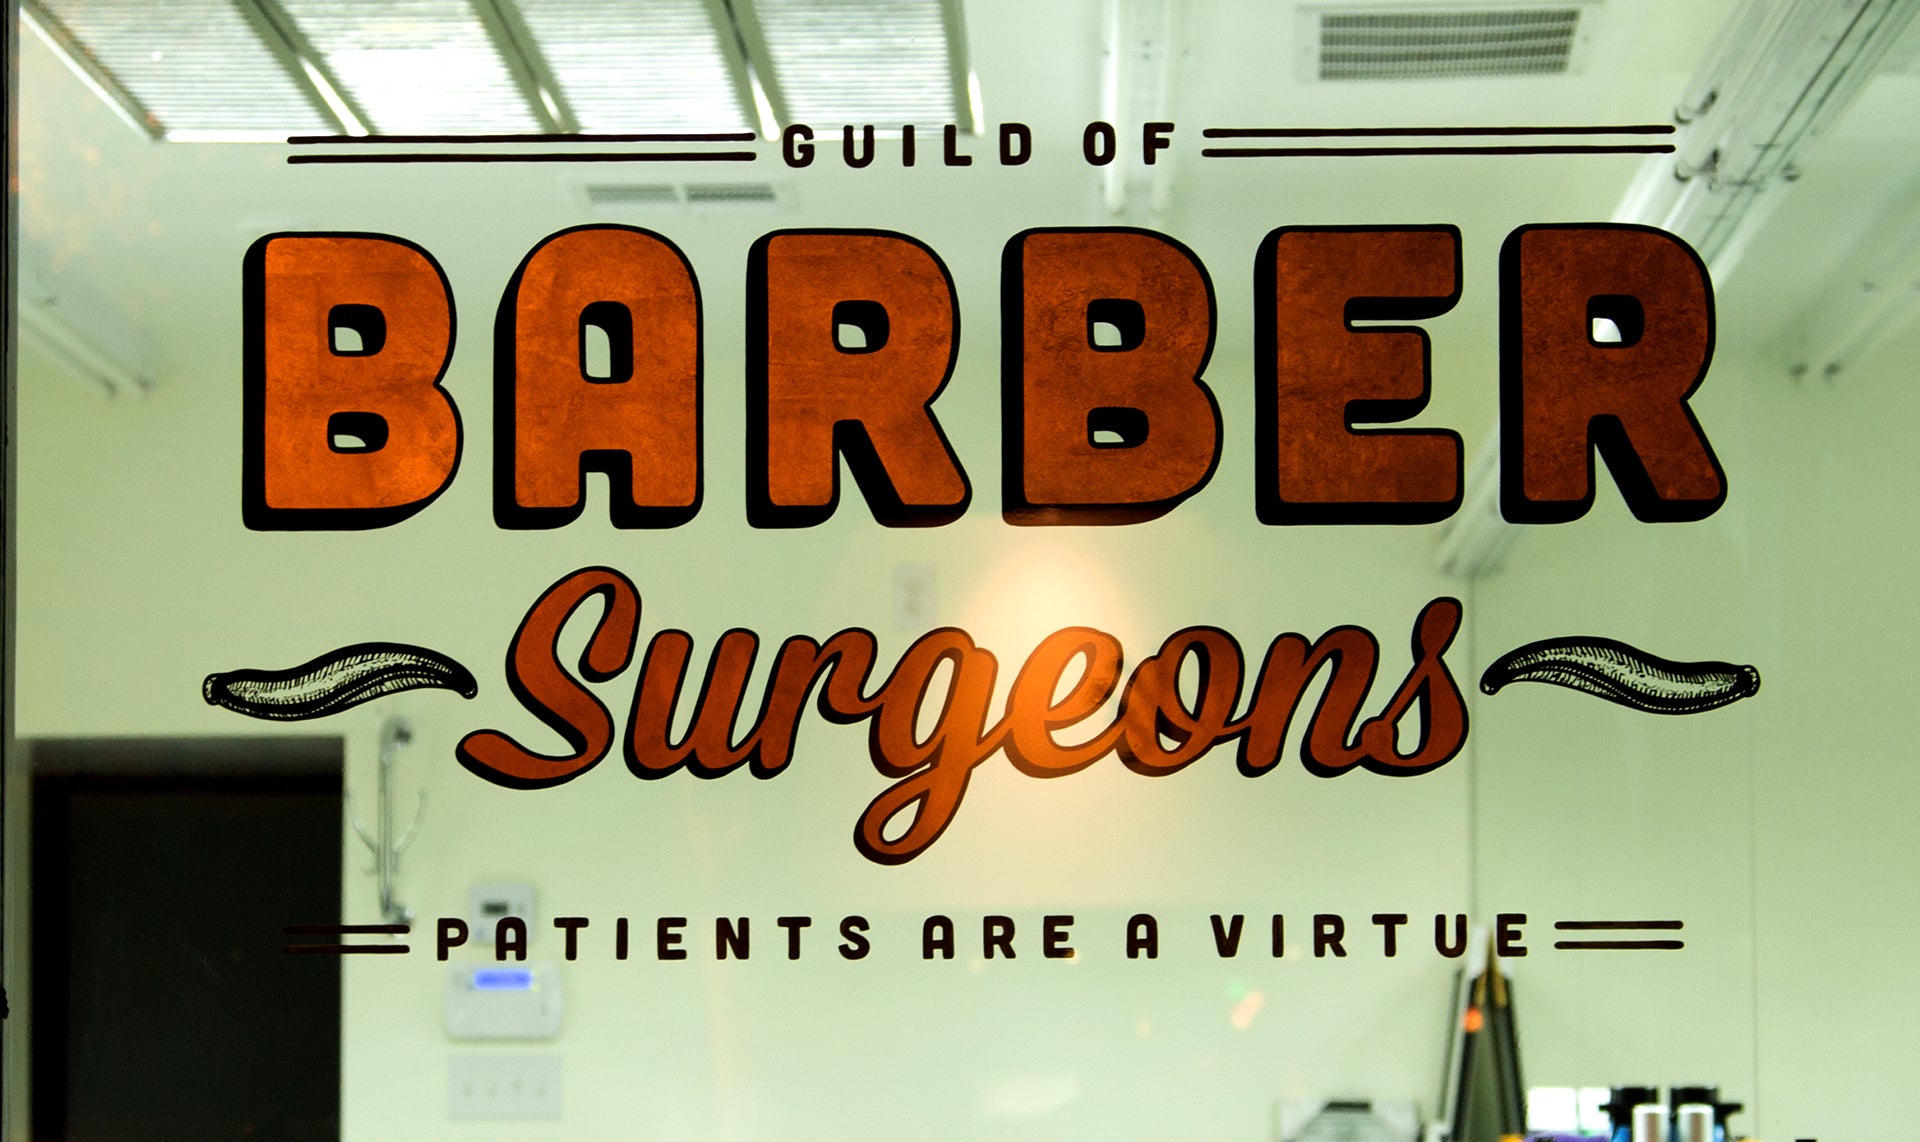 Fullerton's Barber Surgeons where patients are a virtue